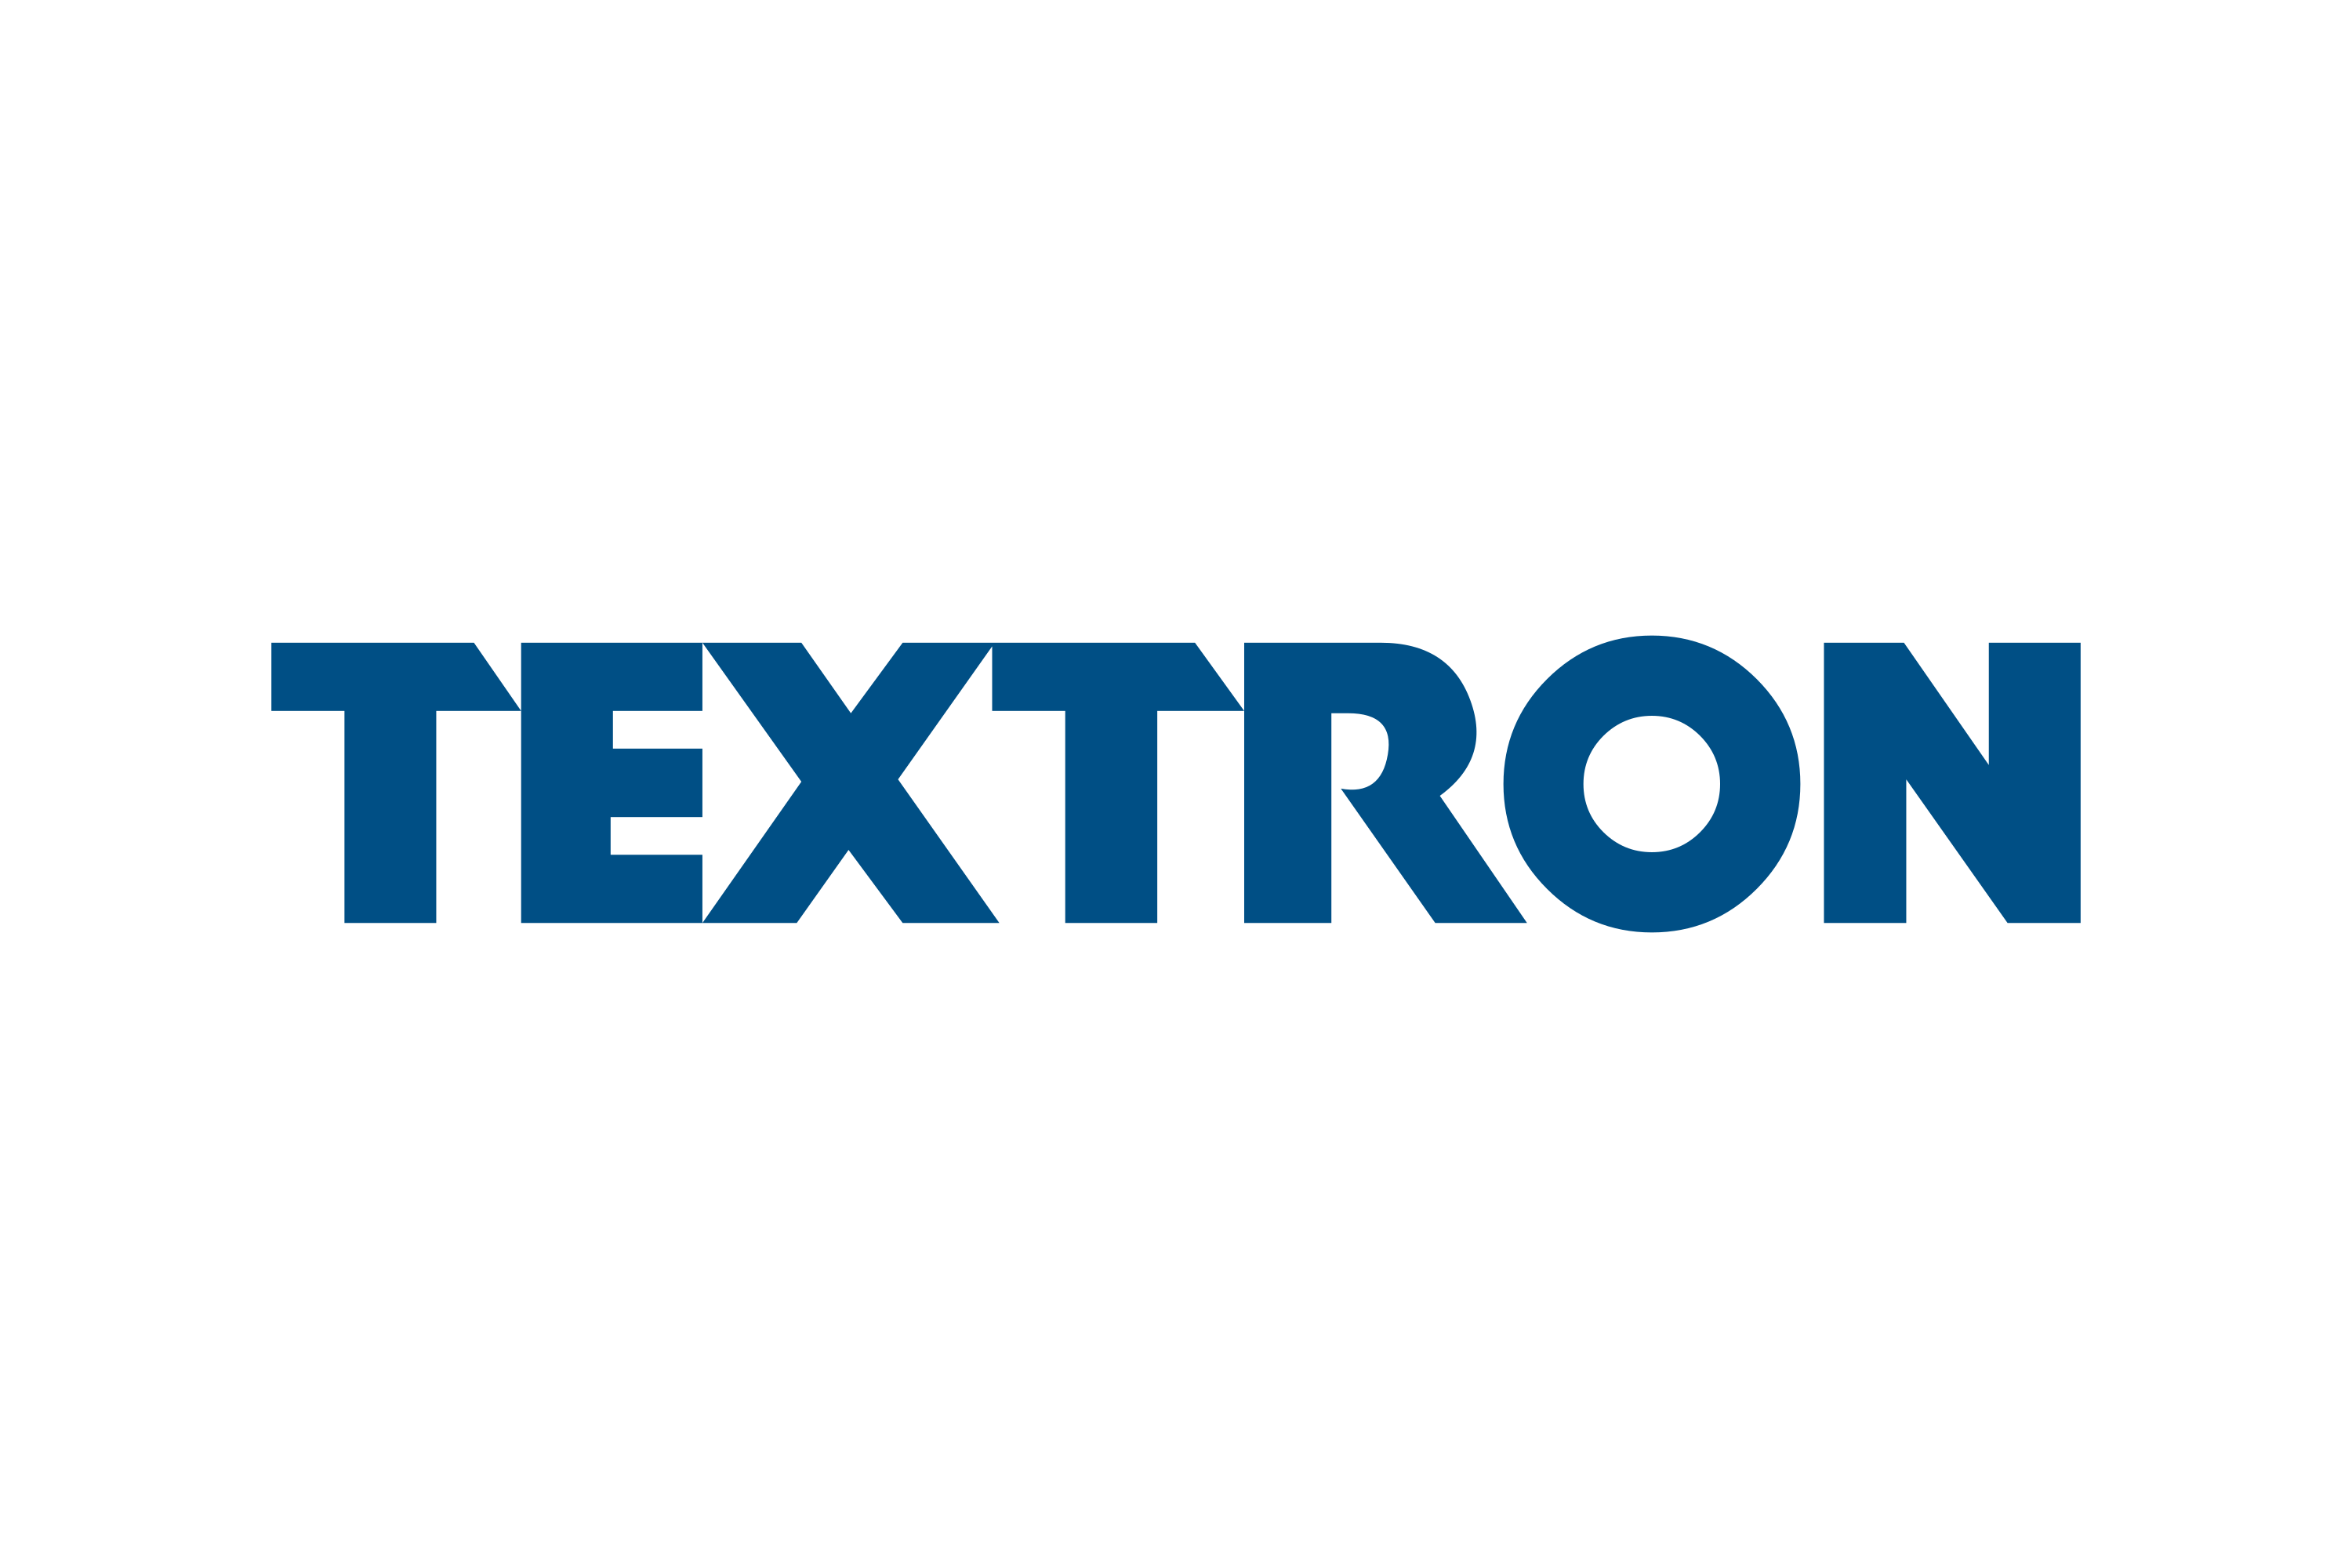 Download Textron Logo in SVG Vector or PNG File Format - Logo.wine